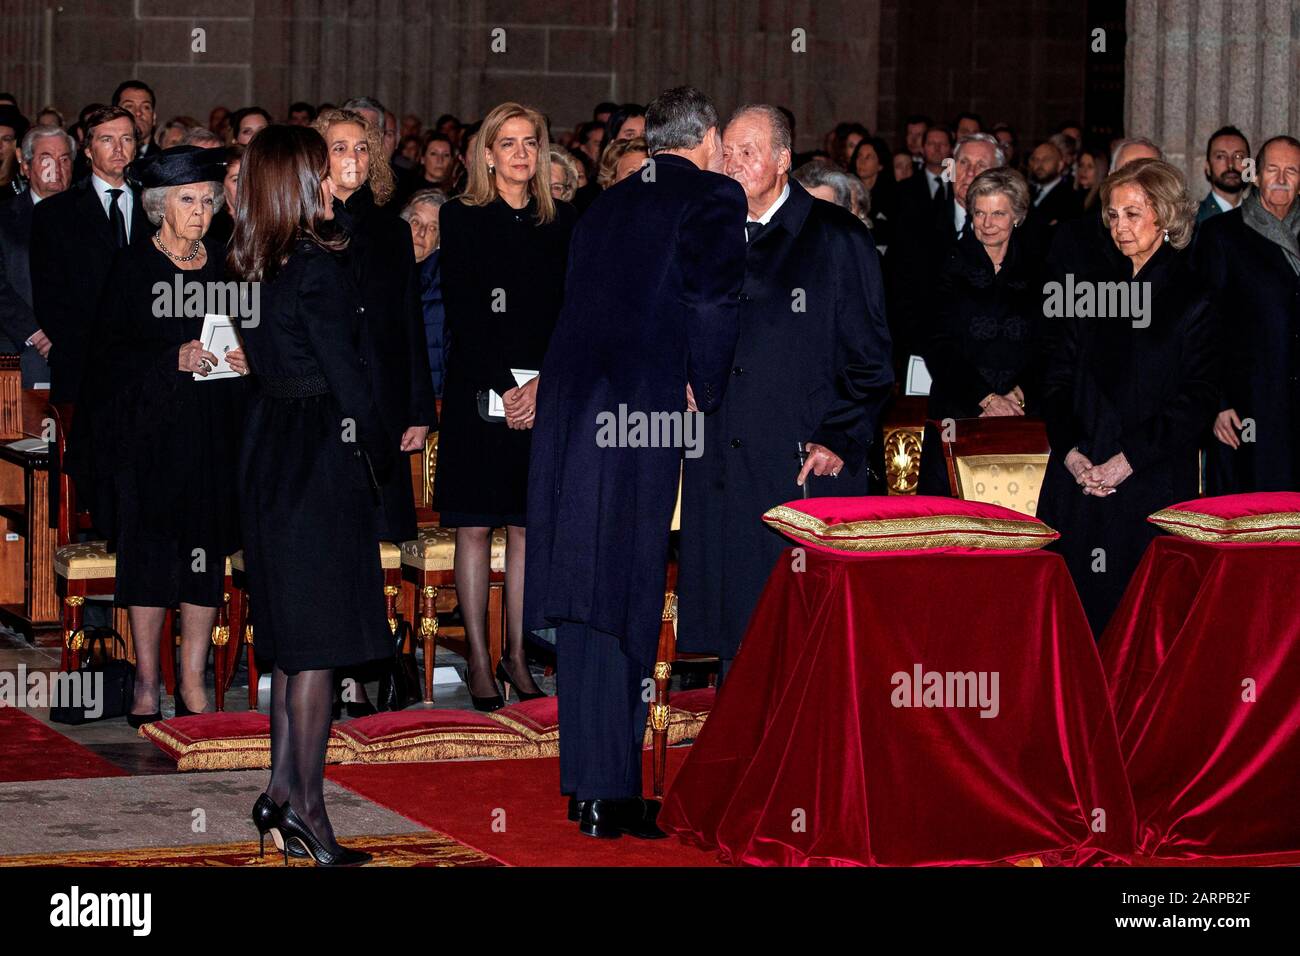 El Escorial, Spain. 29th Jan, 2020. Spain's King Felipe VI (C-L) greets his father, Emeritus King Juan Carlos I (c-R), as Queen Letizia (2-L) and Emeritus Queen Sofia (R, front), look on, upon their arrival to attend the funeral of Spanish princess Pilar de Borbon, Duchess of Badajoz and Monarch' aunt, at the Real Monasterio de San Lorenzo basilica, in El Escorial, outside Madrid, Spain, 29 January 2020. More than 200 people attend the funeral, held 21 days after the death of the princess at 83. EFE/ Emilio Naranjo POOL Credit: CORDON PRESS/Alamy Live News Stock Photo